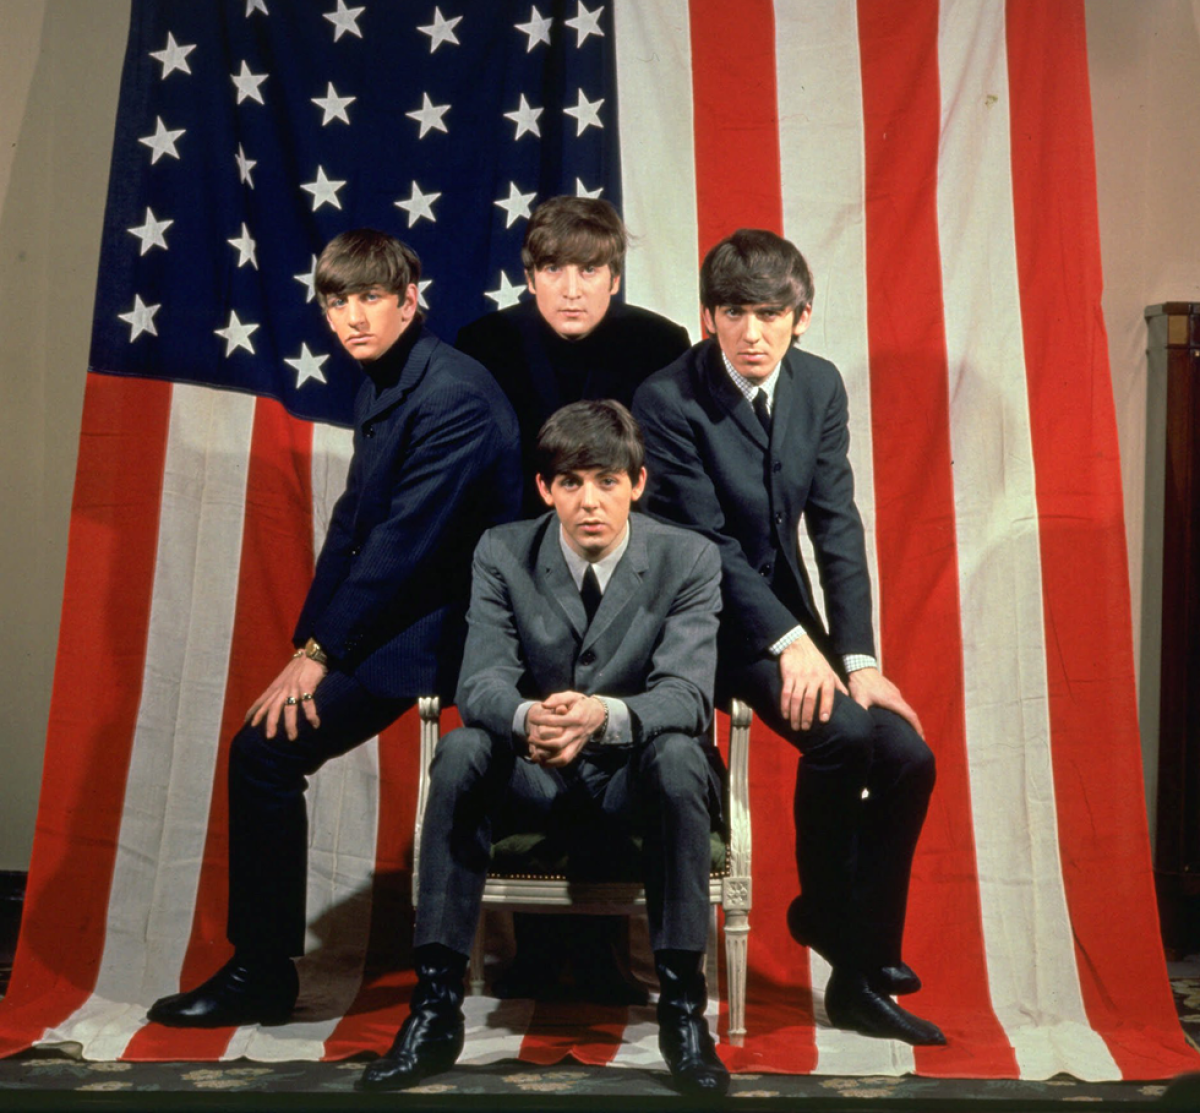 The Beatles, clockwise from top center, John Lennon, George Harrison, Paul McCartney and Ringo Starr, pose with an American flag in a Paris photo studio prior to their first visit to the United States in 1964.